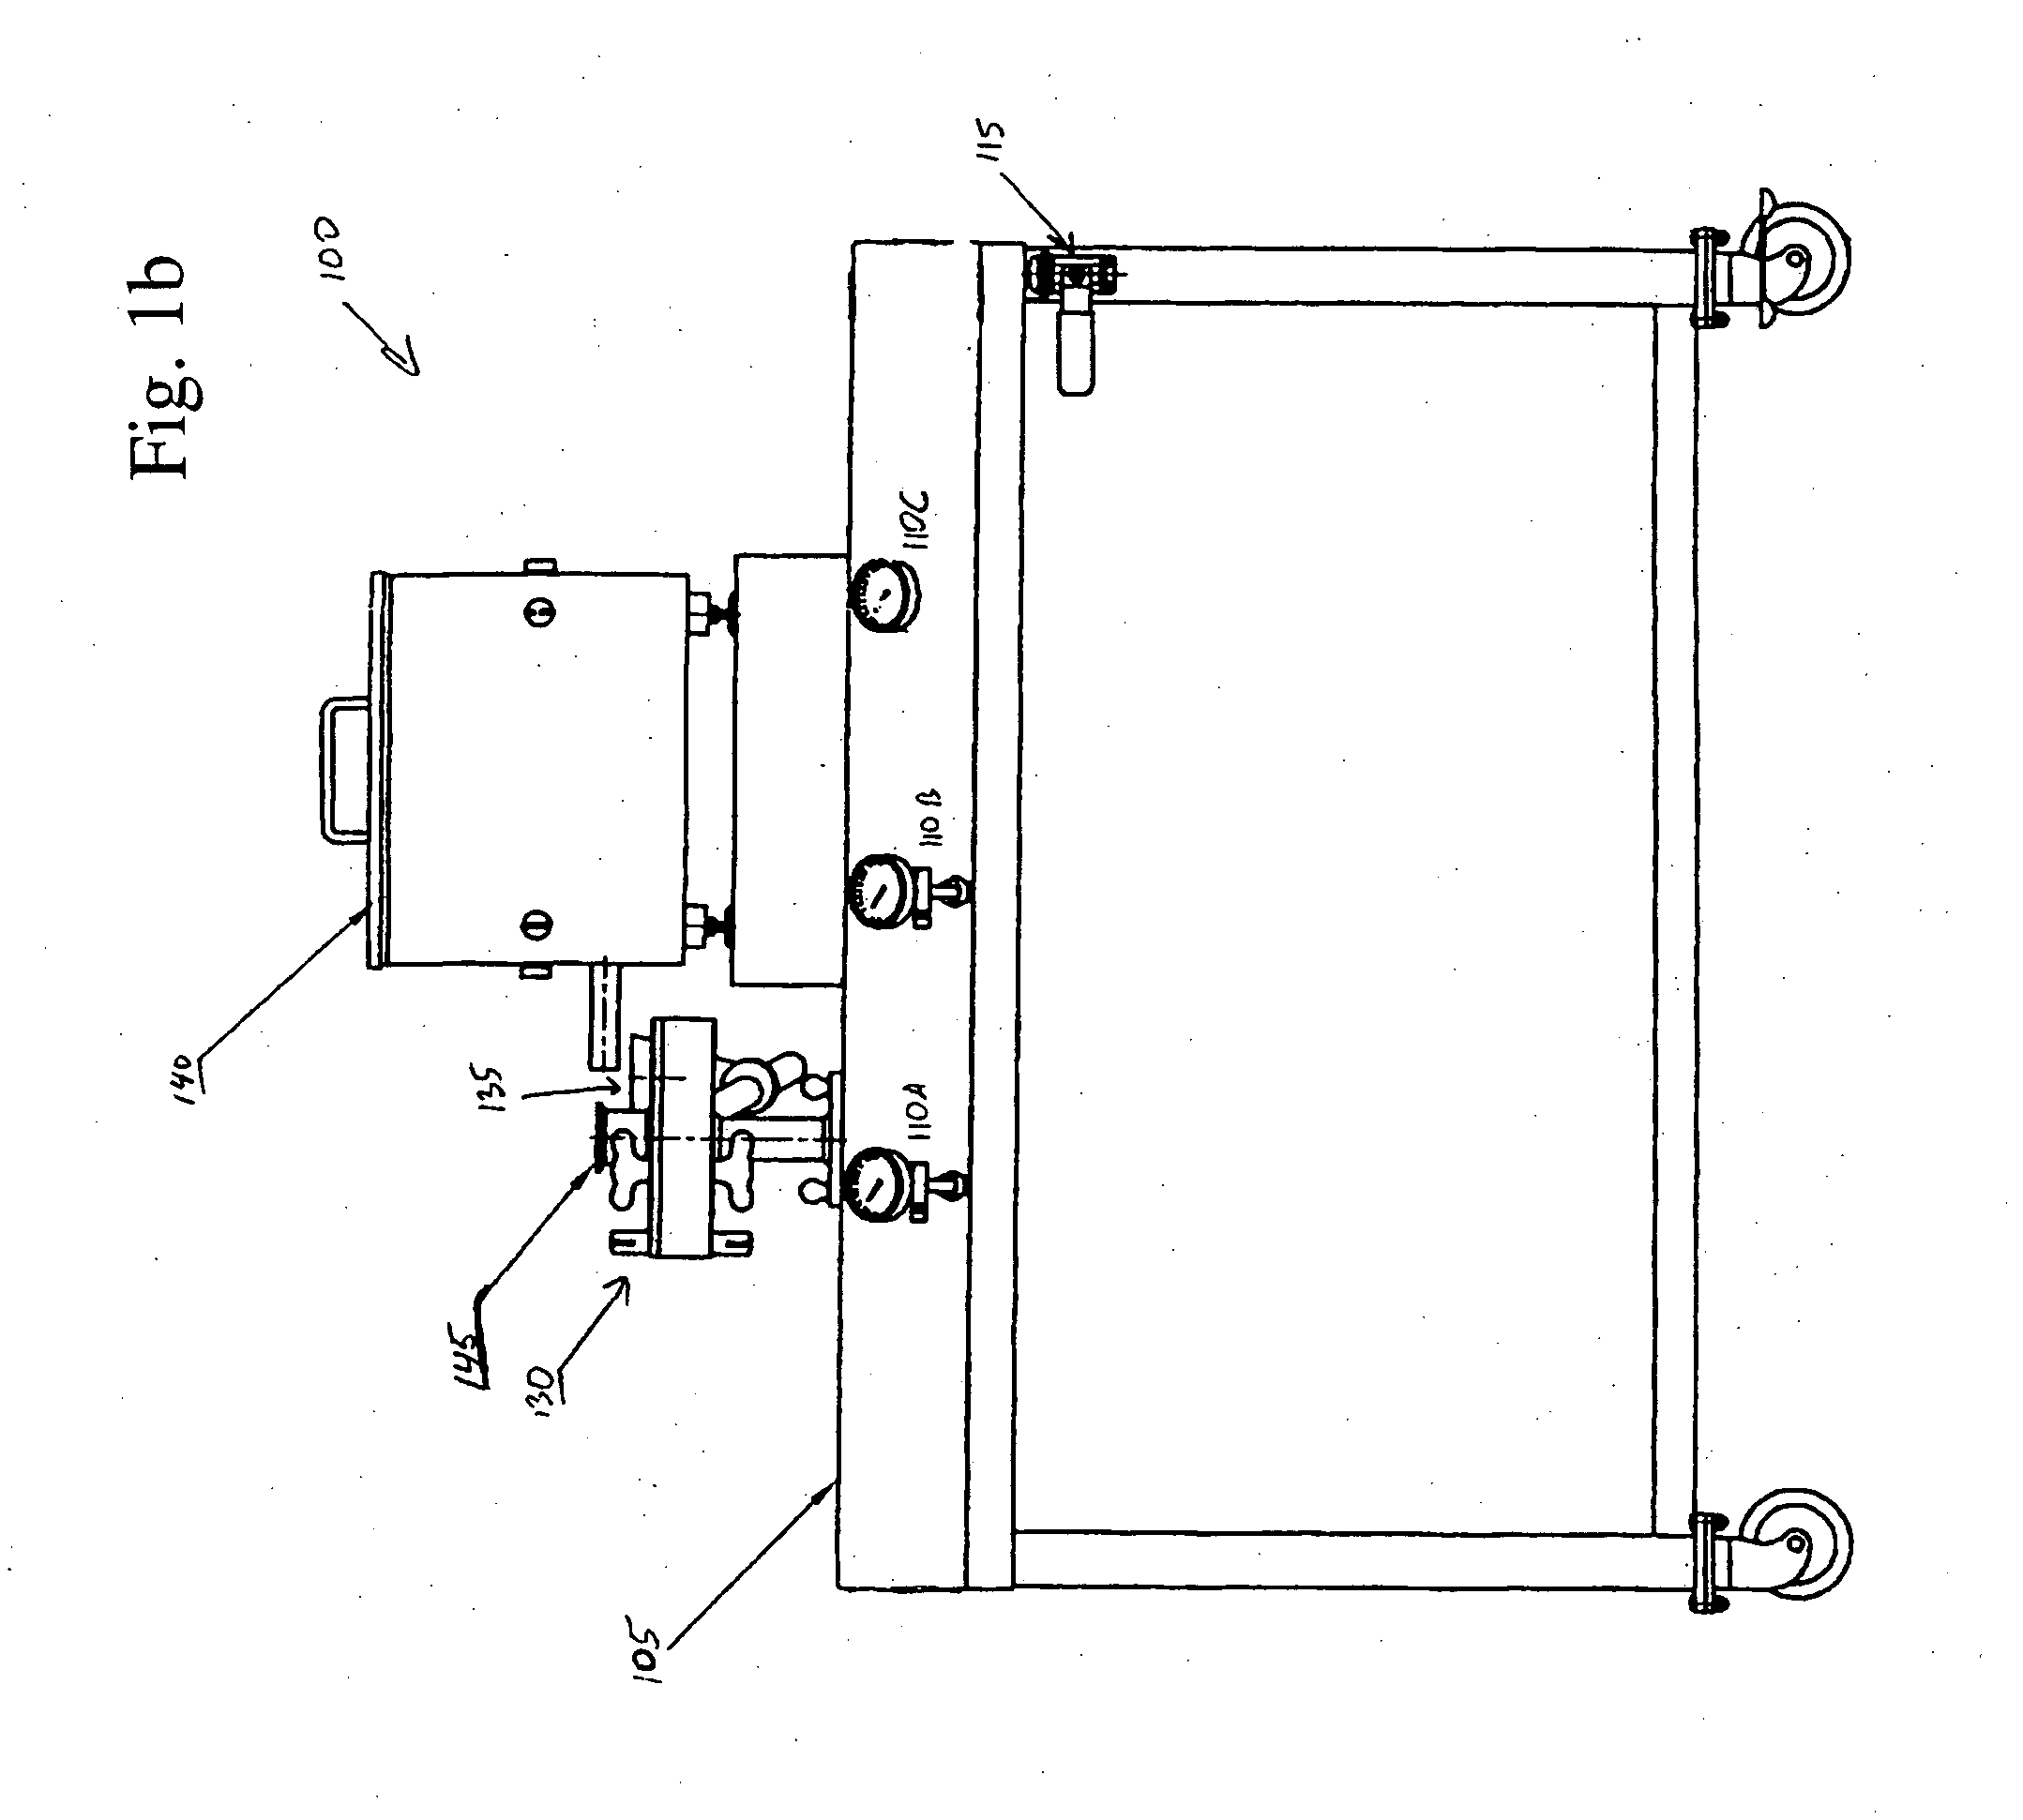 Dry particle based electro-chemical device and methods of making same